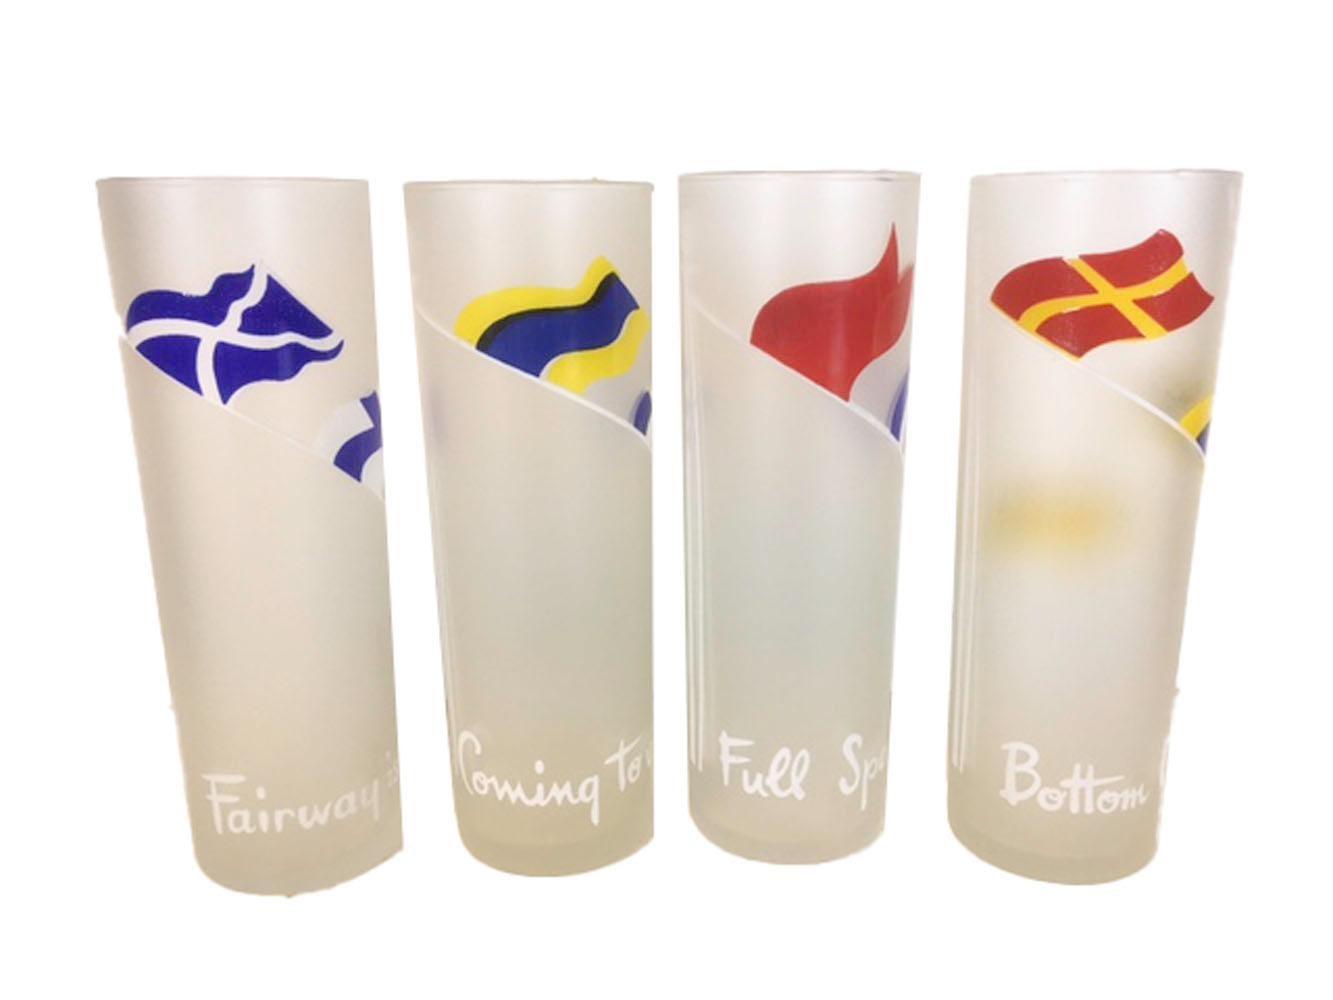 Set of 8 vintage, nautical themed cocktail glasses, each with a different set of signal flags and their meaning in brightly colored enamel on a frosted ground. The colorful enameled flags raised on a white flag pole with text at the bottom of each